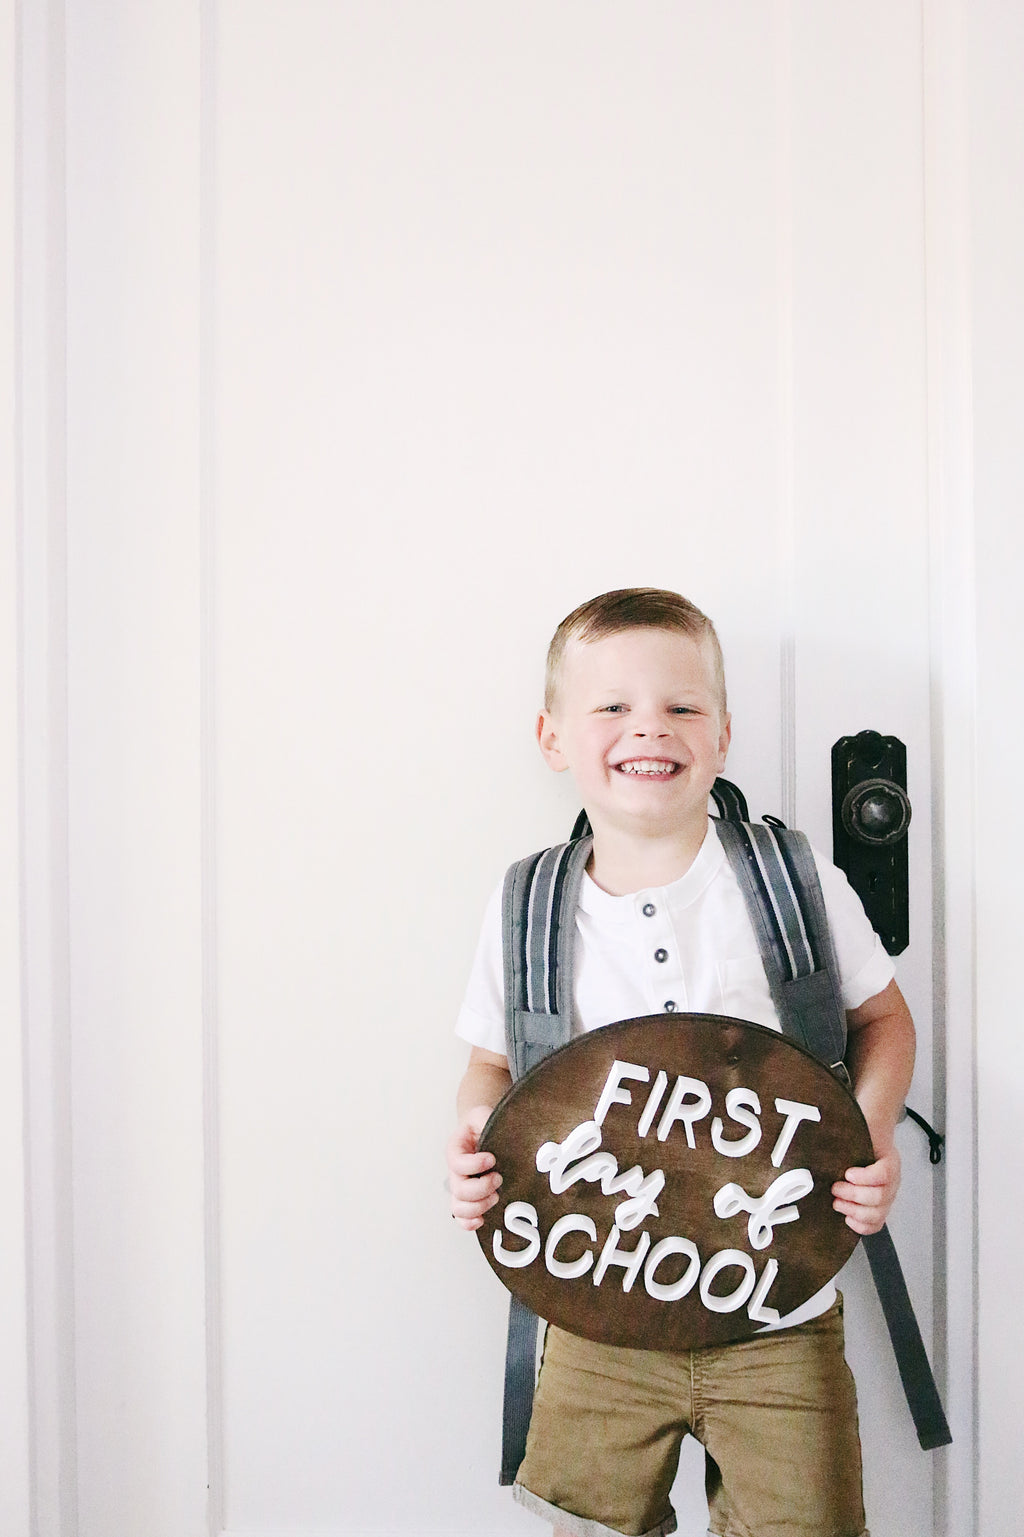 12" First Day of School Sign